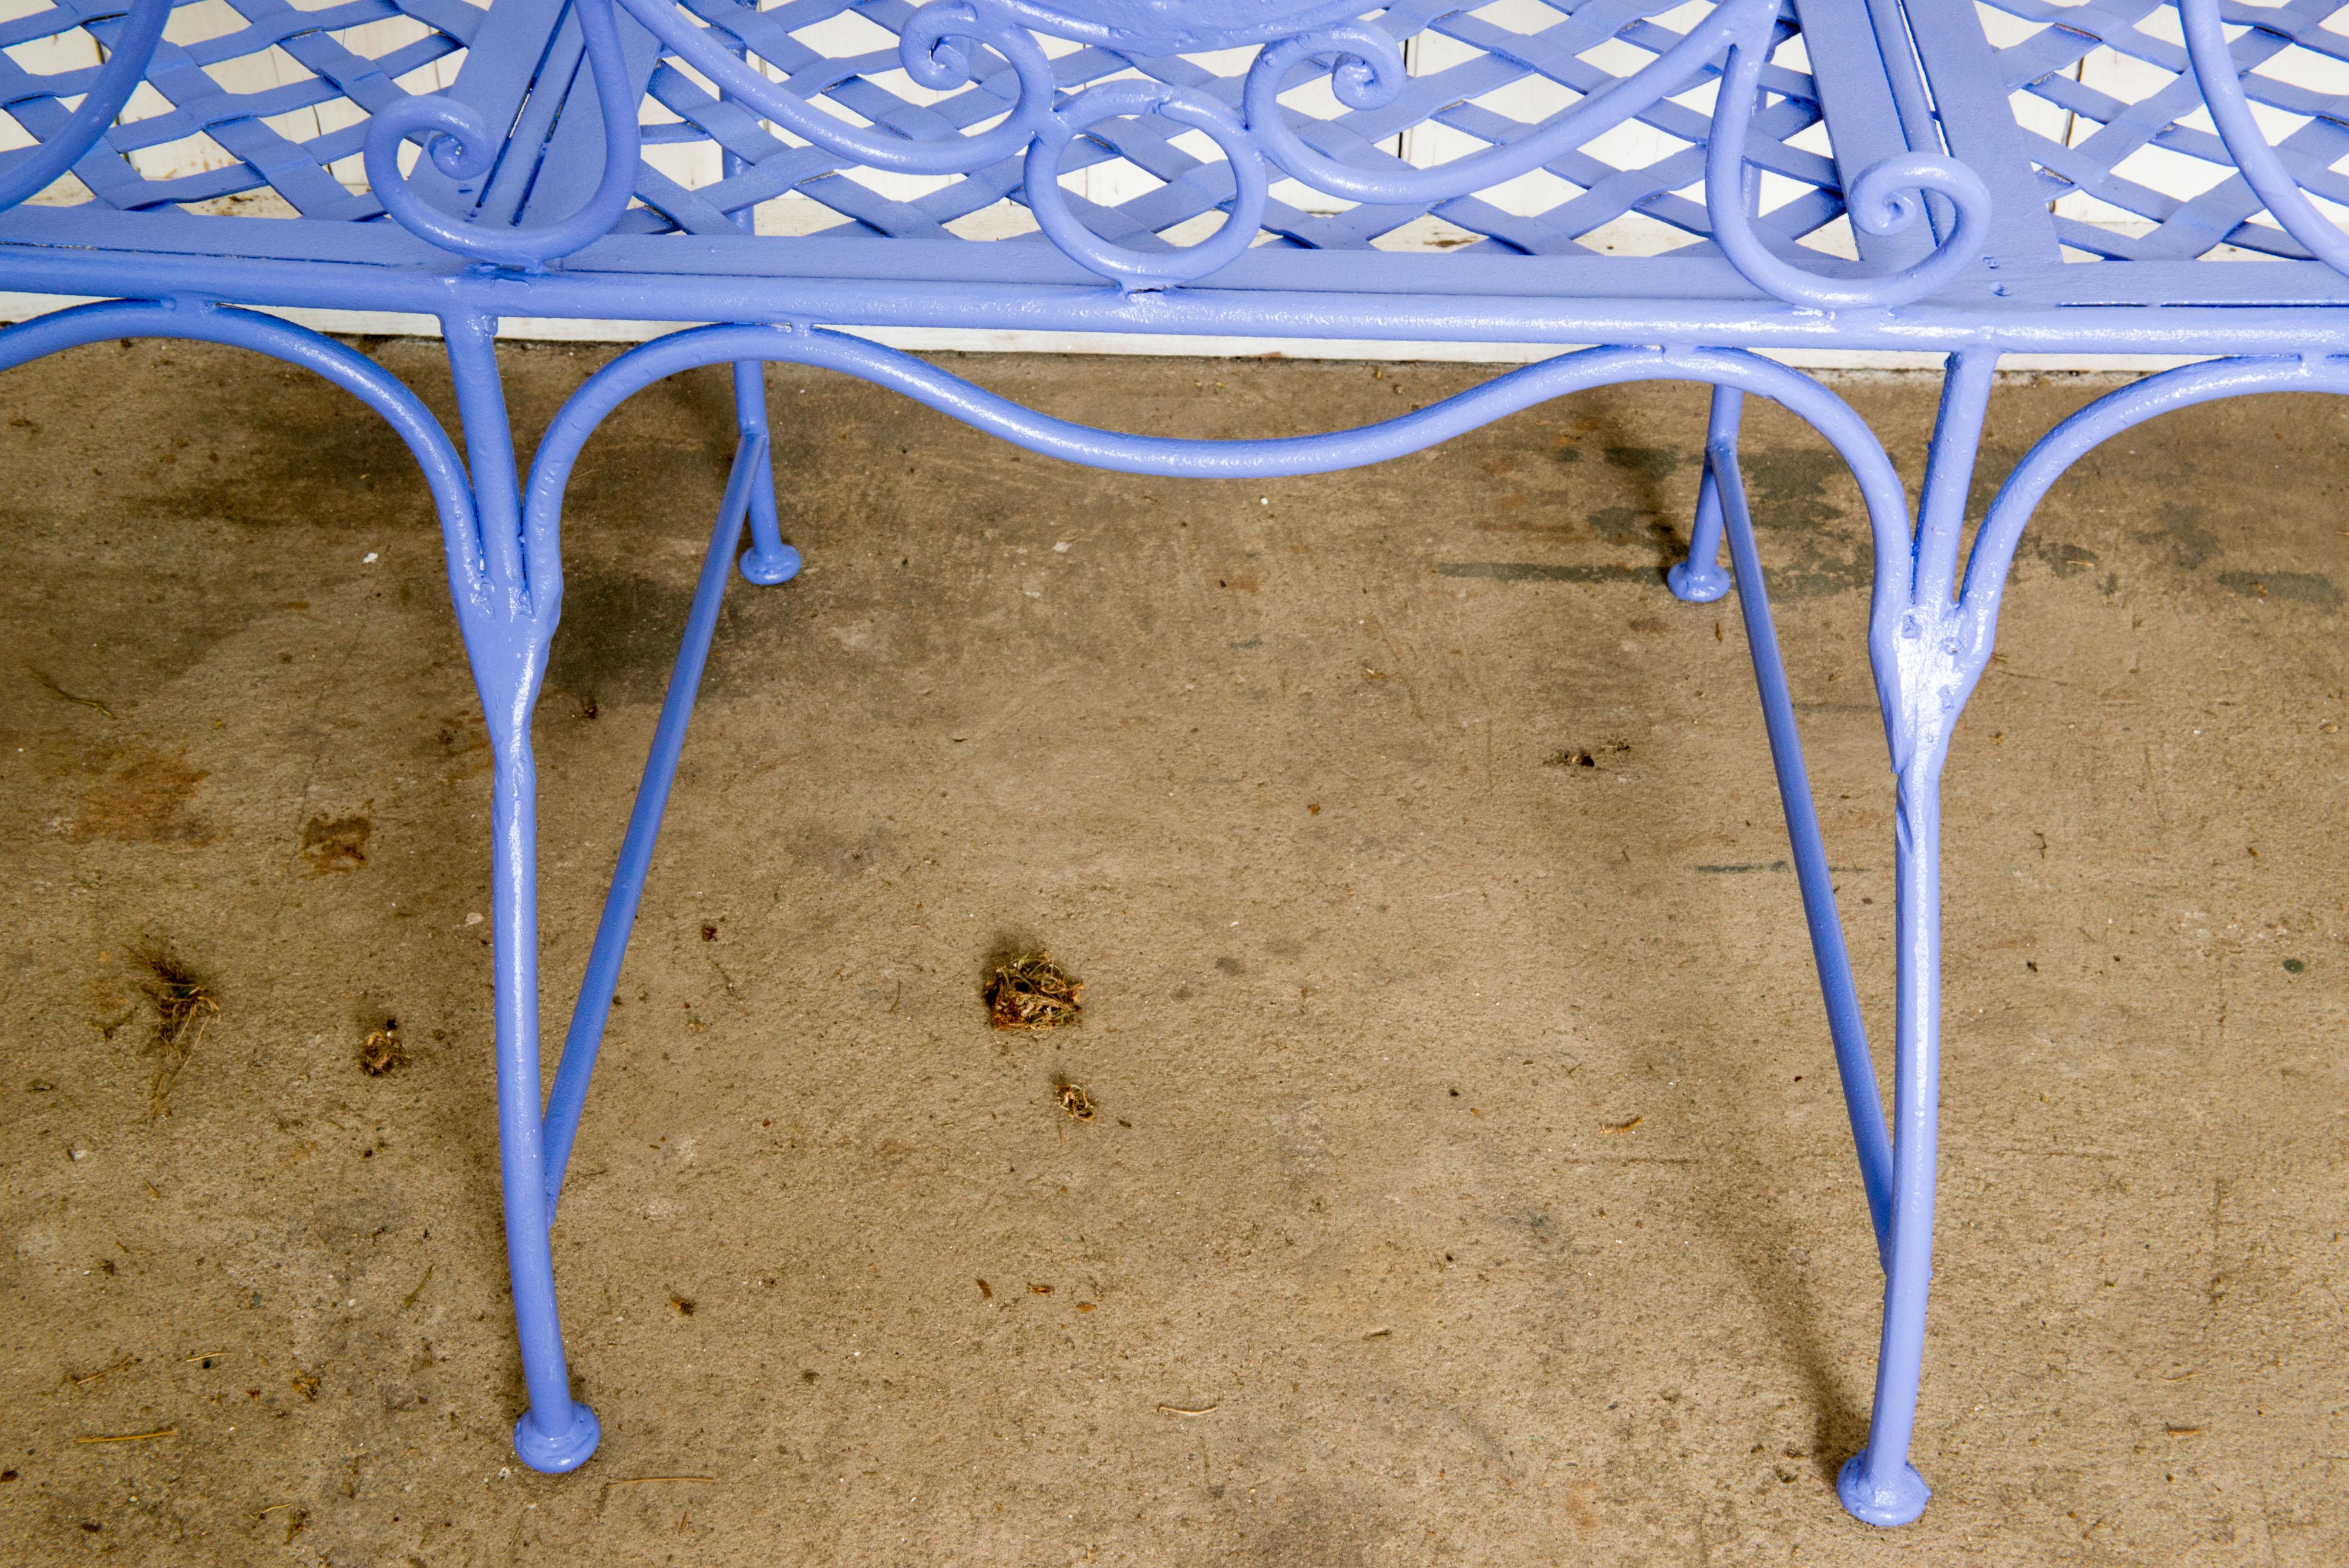 Wrought Iron Garden Bench, Periwinkle For Sale 11